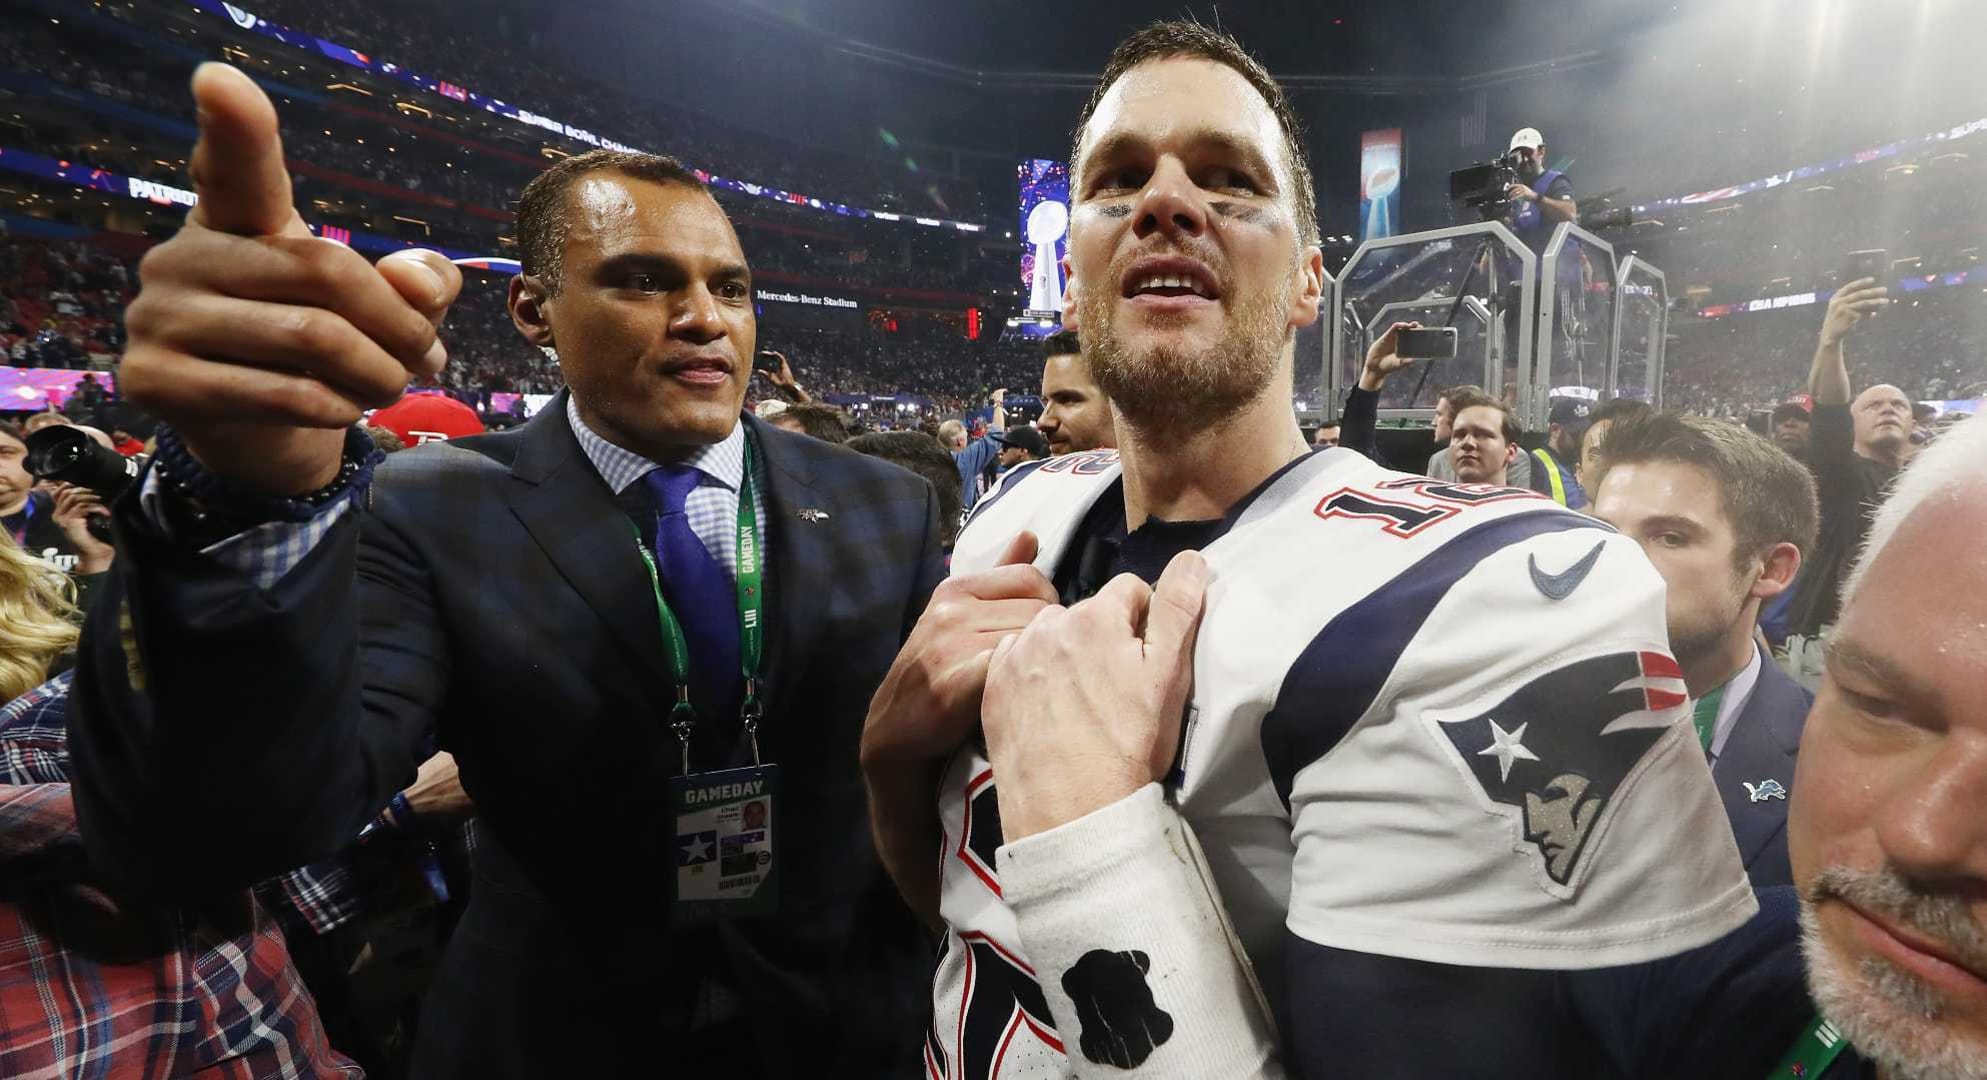 Tom Brady #12 of the New England Patriots reacts after the Patriots defeat the Los Angeles Rams 13-3 during Super Bowl LIII at Mercedes-Benz Stadium on February 3, 2019 in Atlanta, Georgia. (Photo by Jamie Squire/Getty Images)